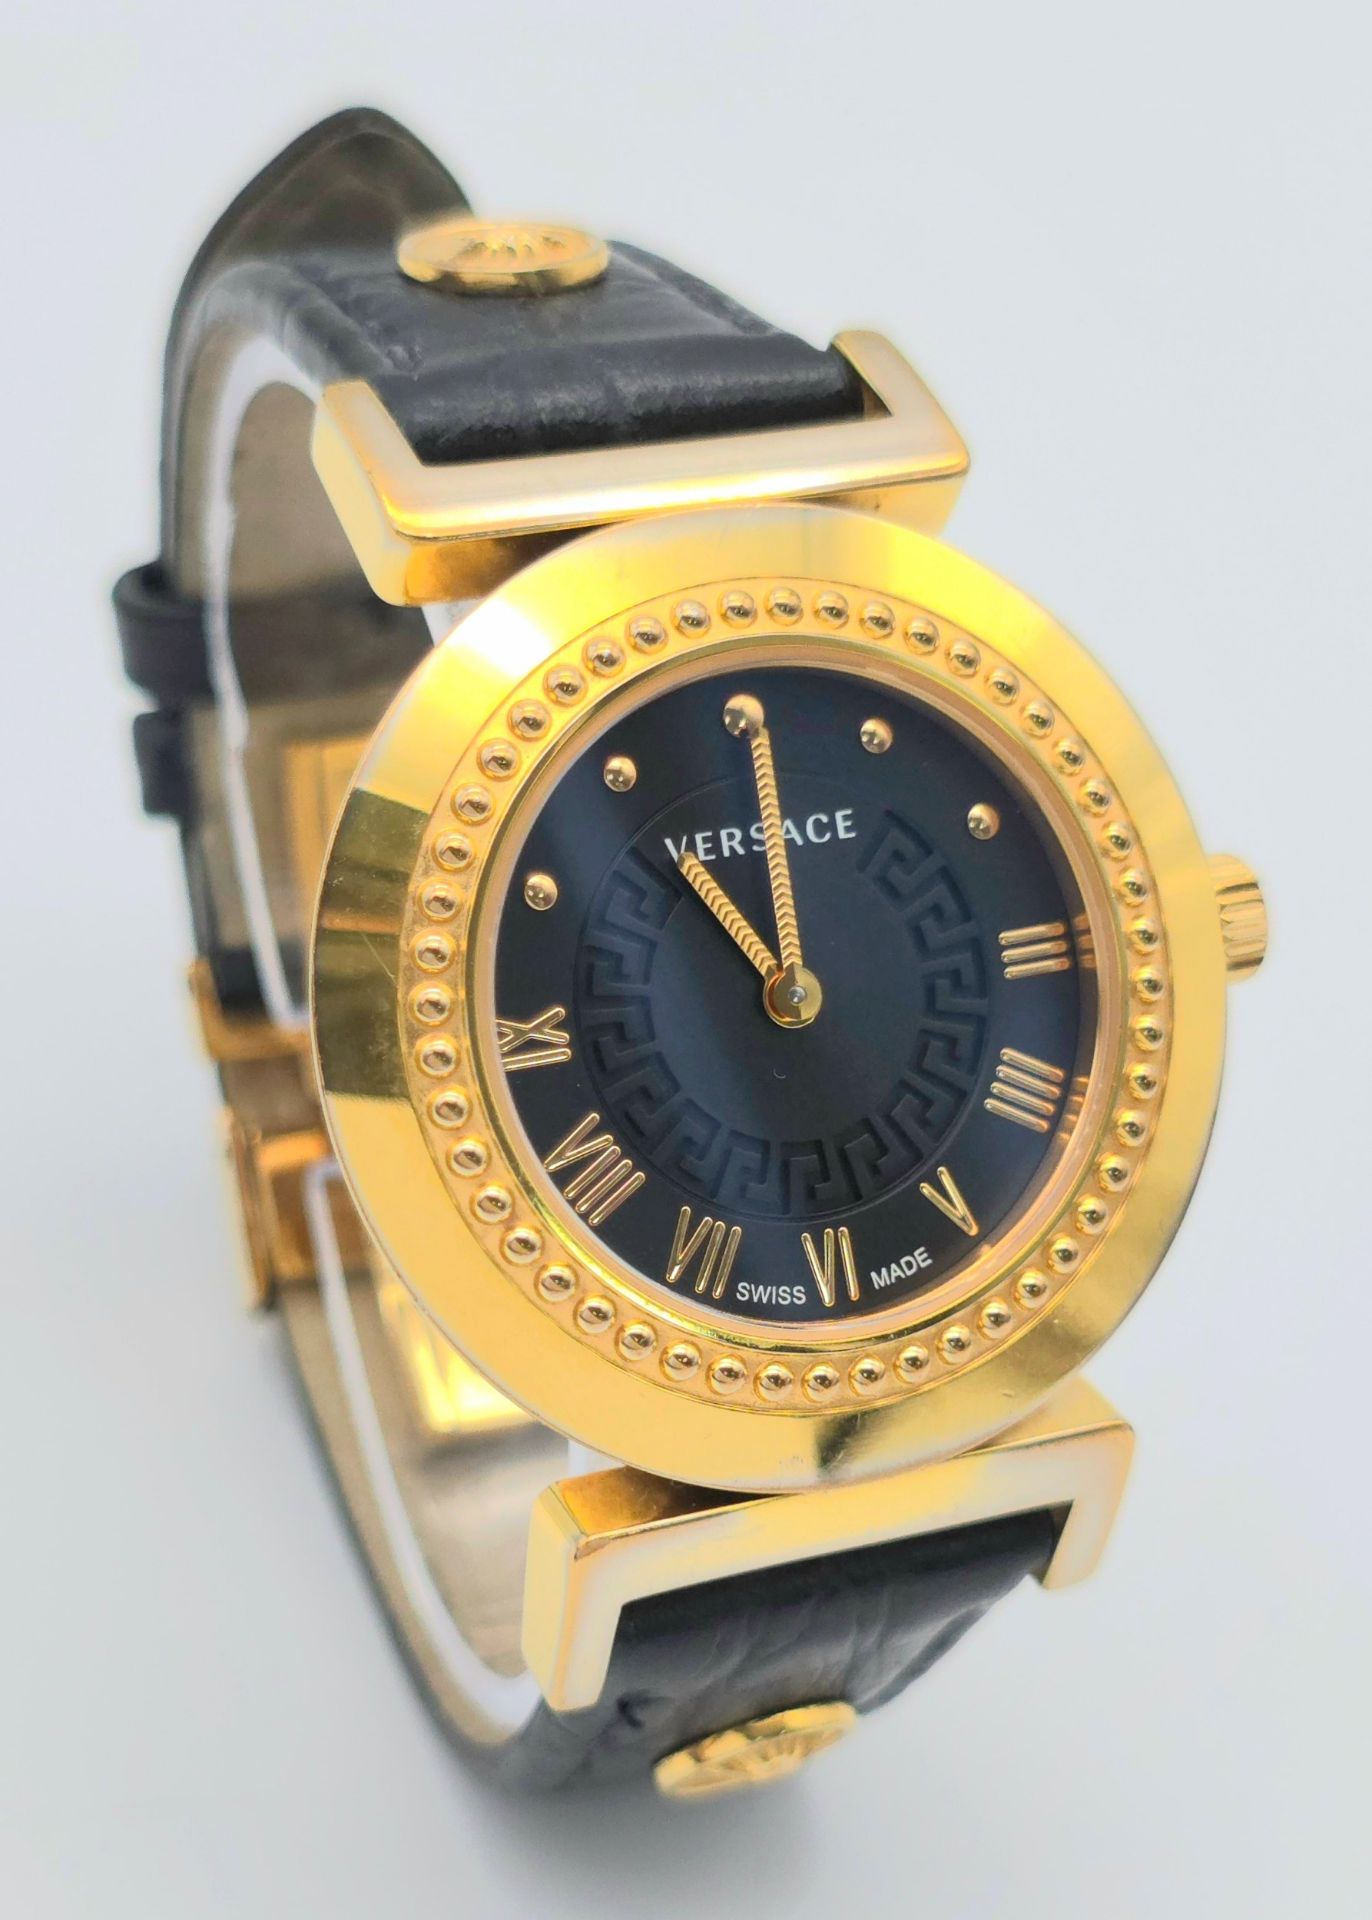 A Versace Designer Quartz Ladies Watch. Black leather and gilded strap and case - 35mm. Black dial - Image 3 of 8